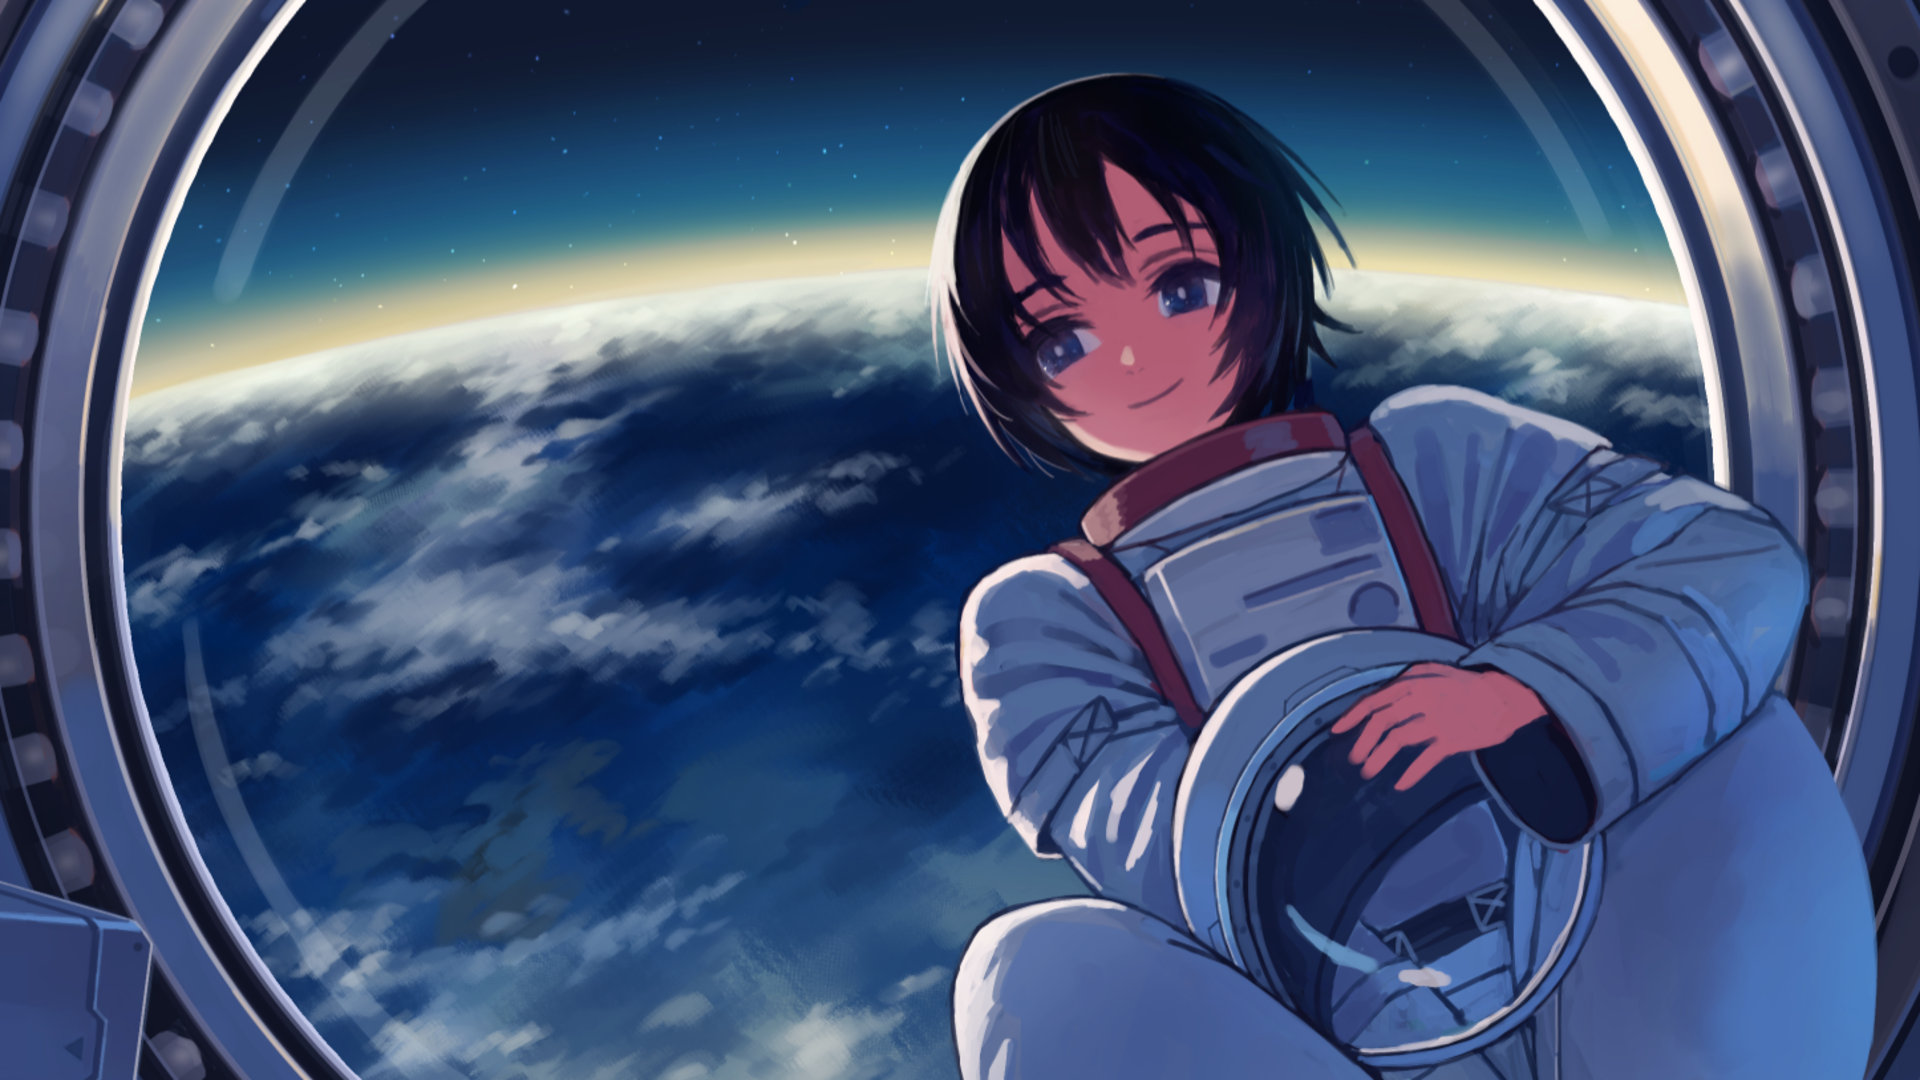 Download Explore Exotic Outer Space with 4K Anime Wallpaper | Wallpapers.com-demhanvico.com.vn